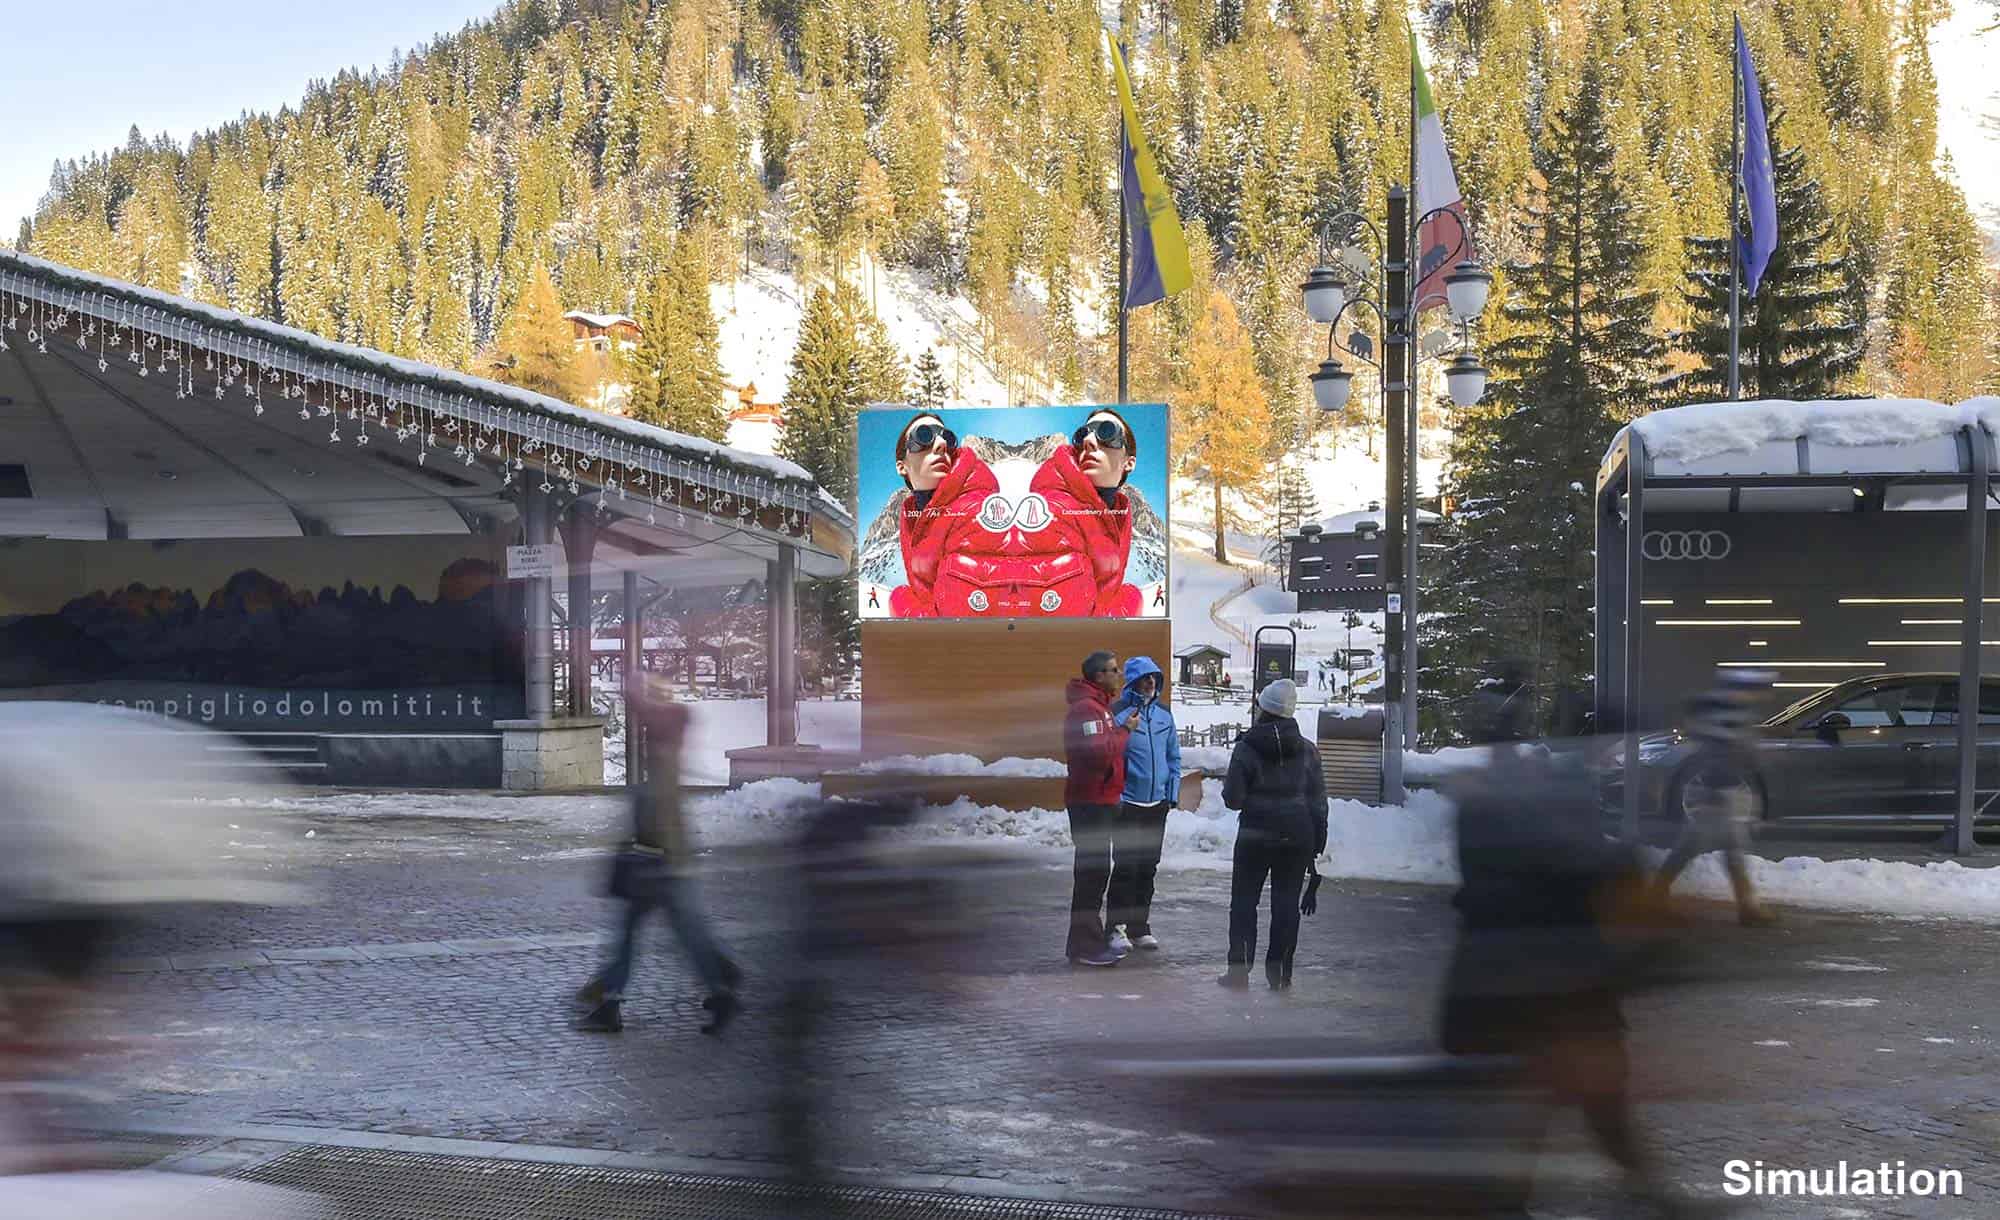 LED Wall in Piazza Sissi, madonna di Campiglio with Moncler (fashion)